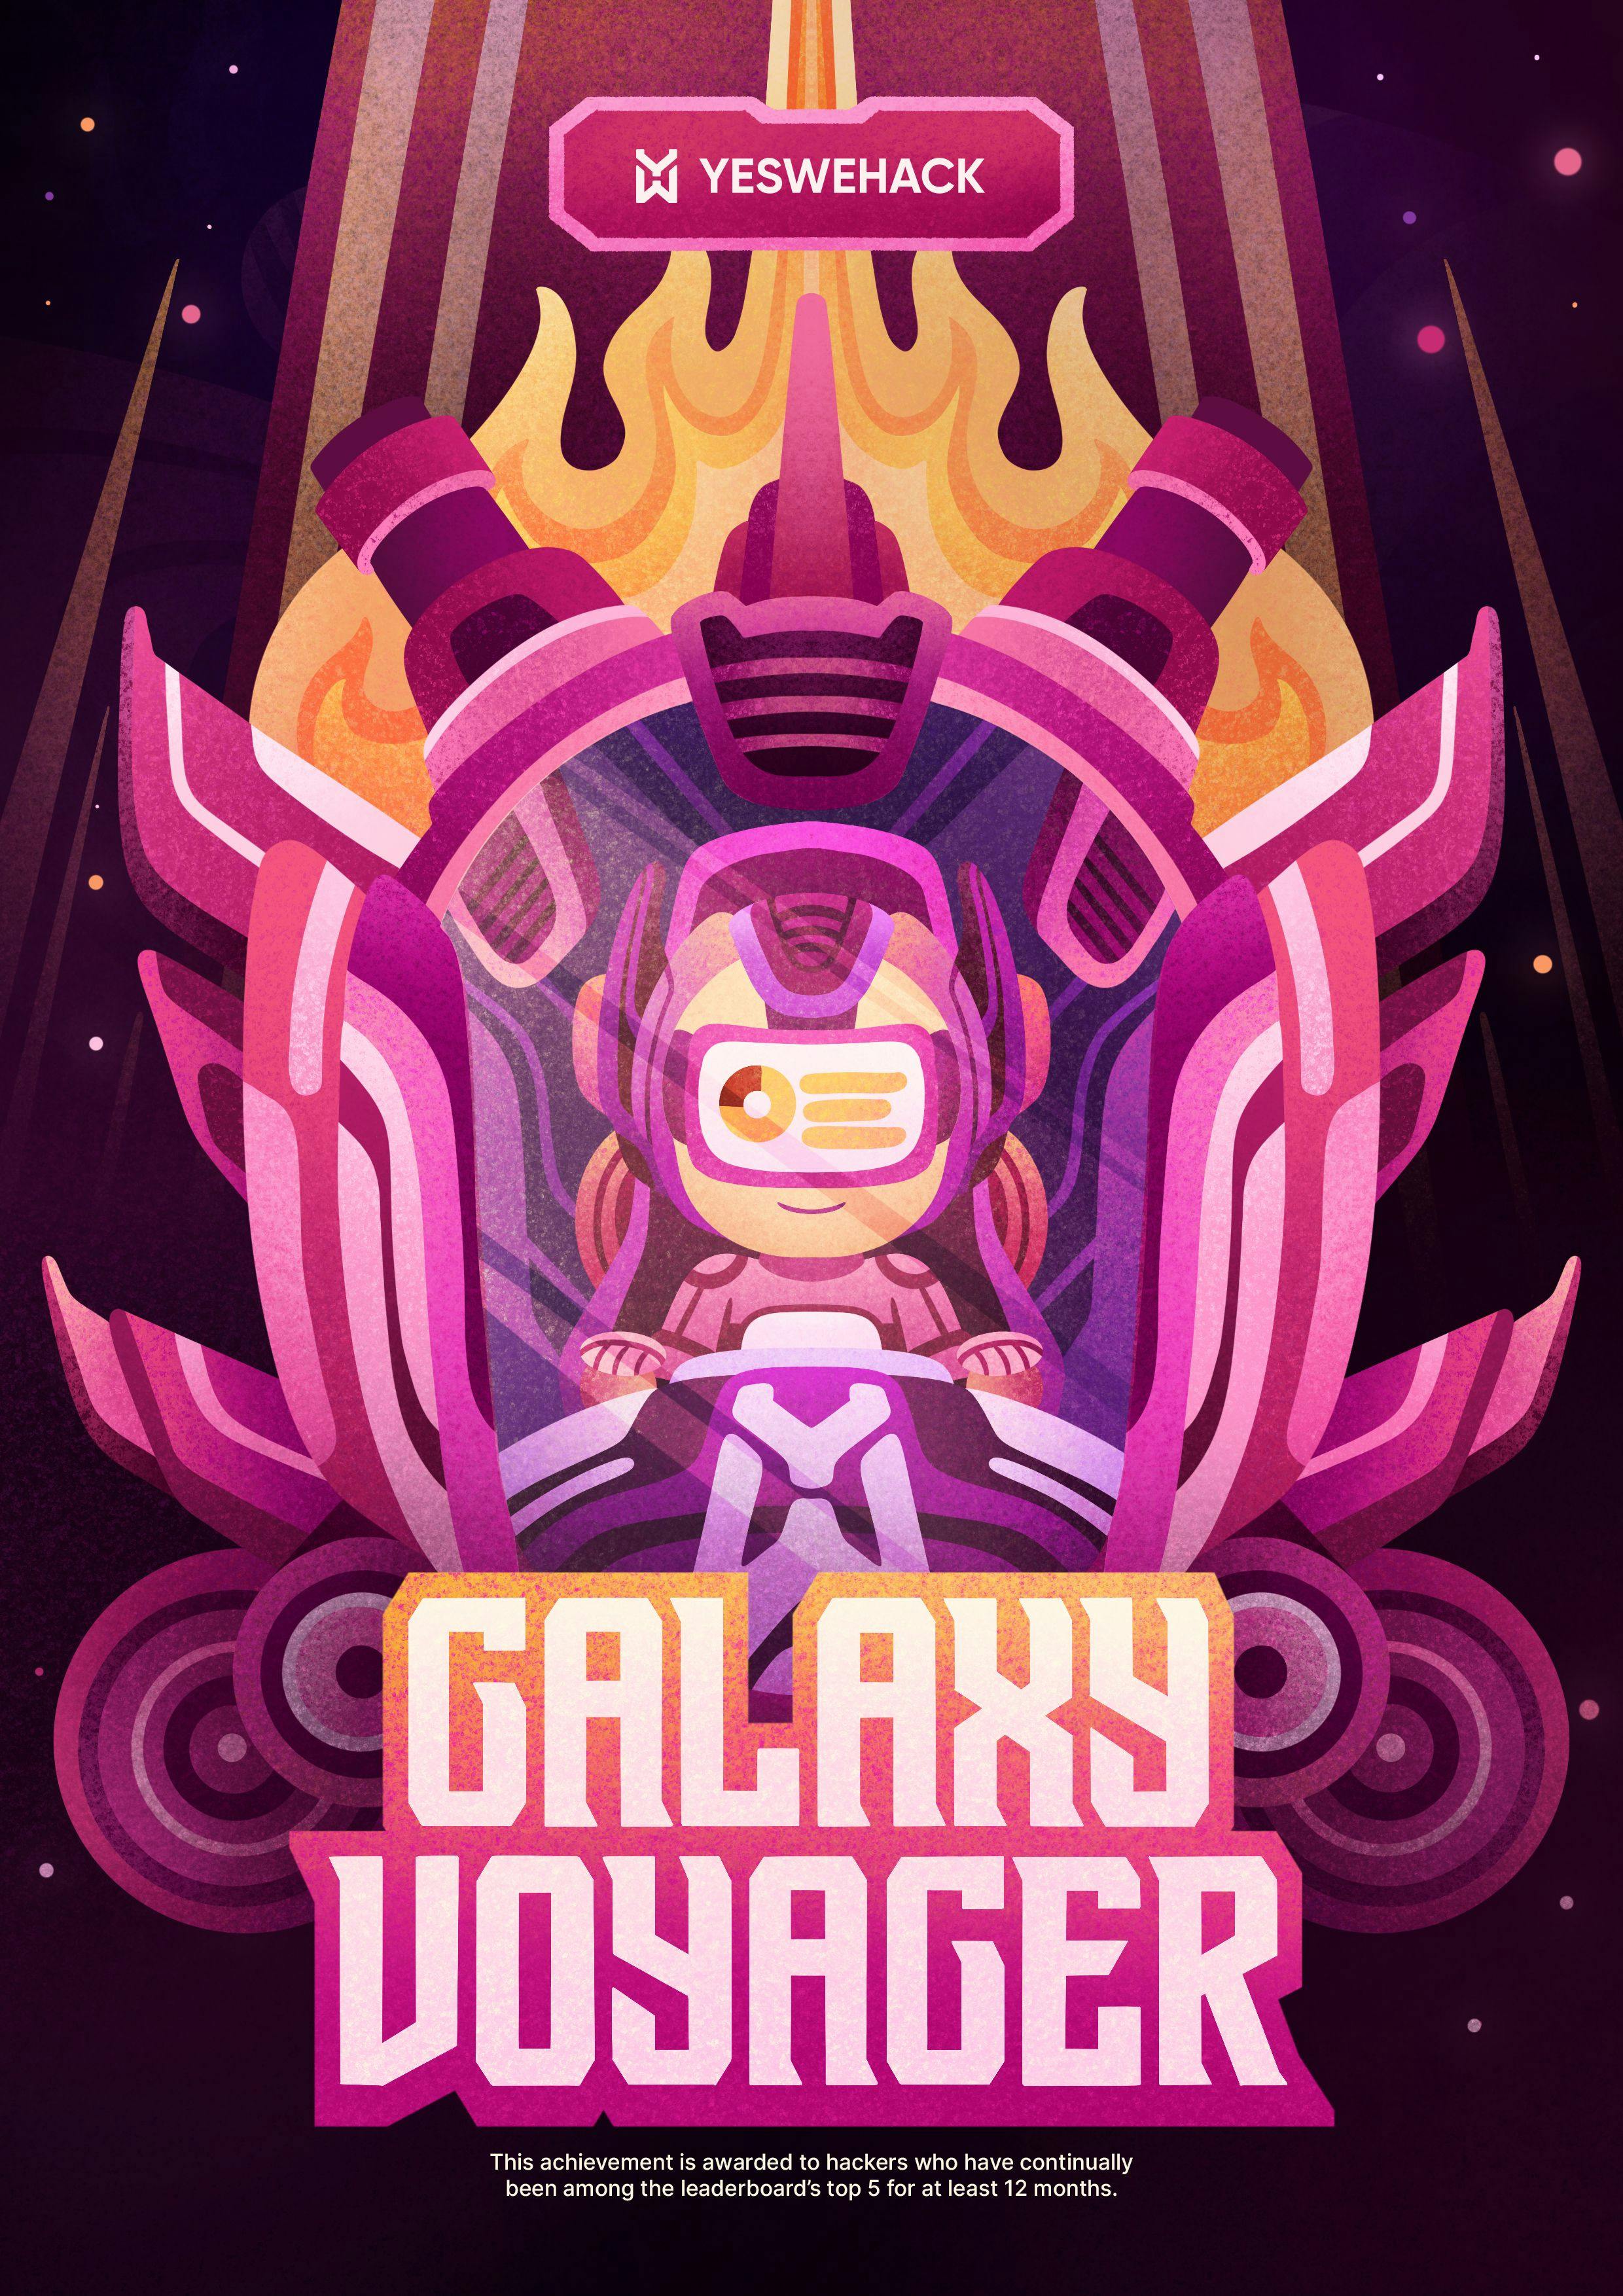 YesWeHack hunter achievements: GALAXY VOYAGER poster for ethical hackers who stay among the top 5 on the leaderboard for at least one year